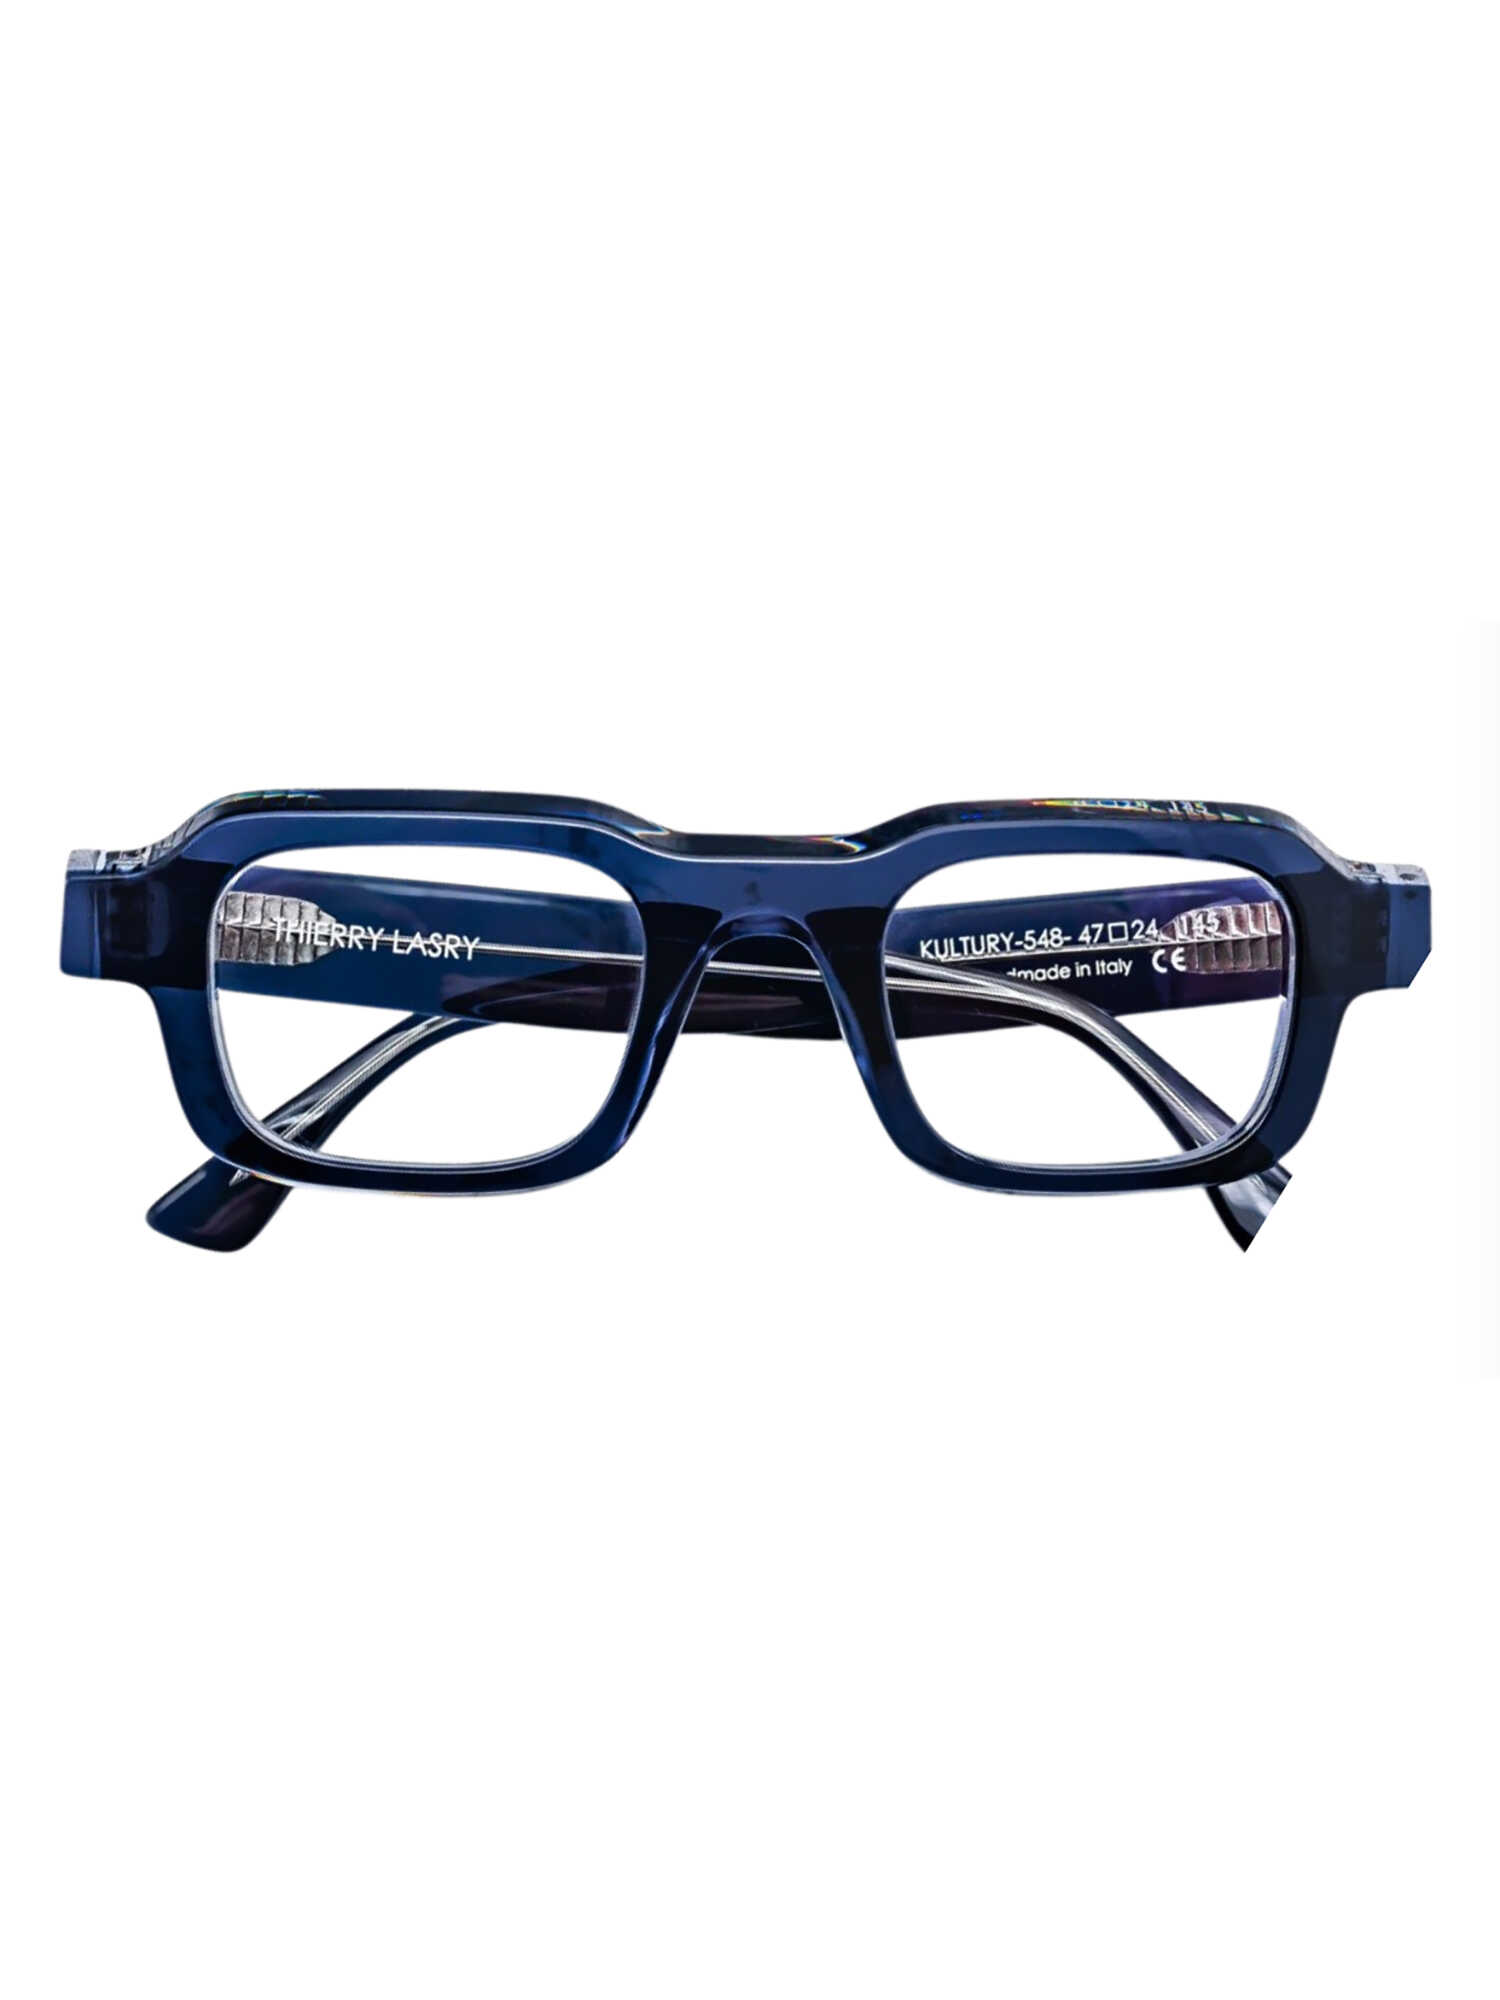 THIERRY LASRY Thierry Lasry KULTURY Blue